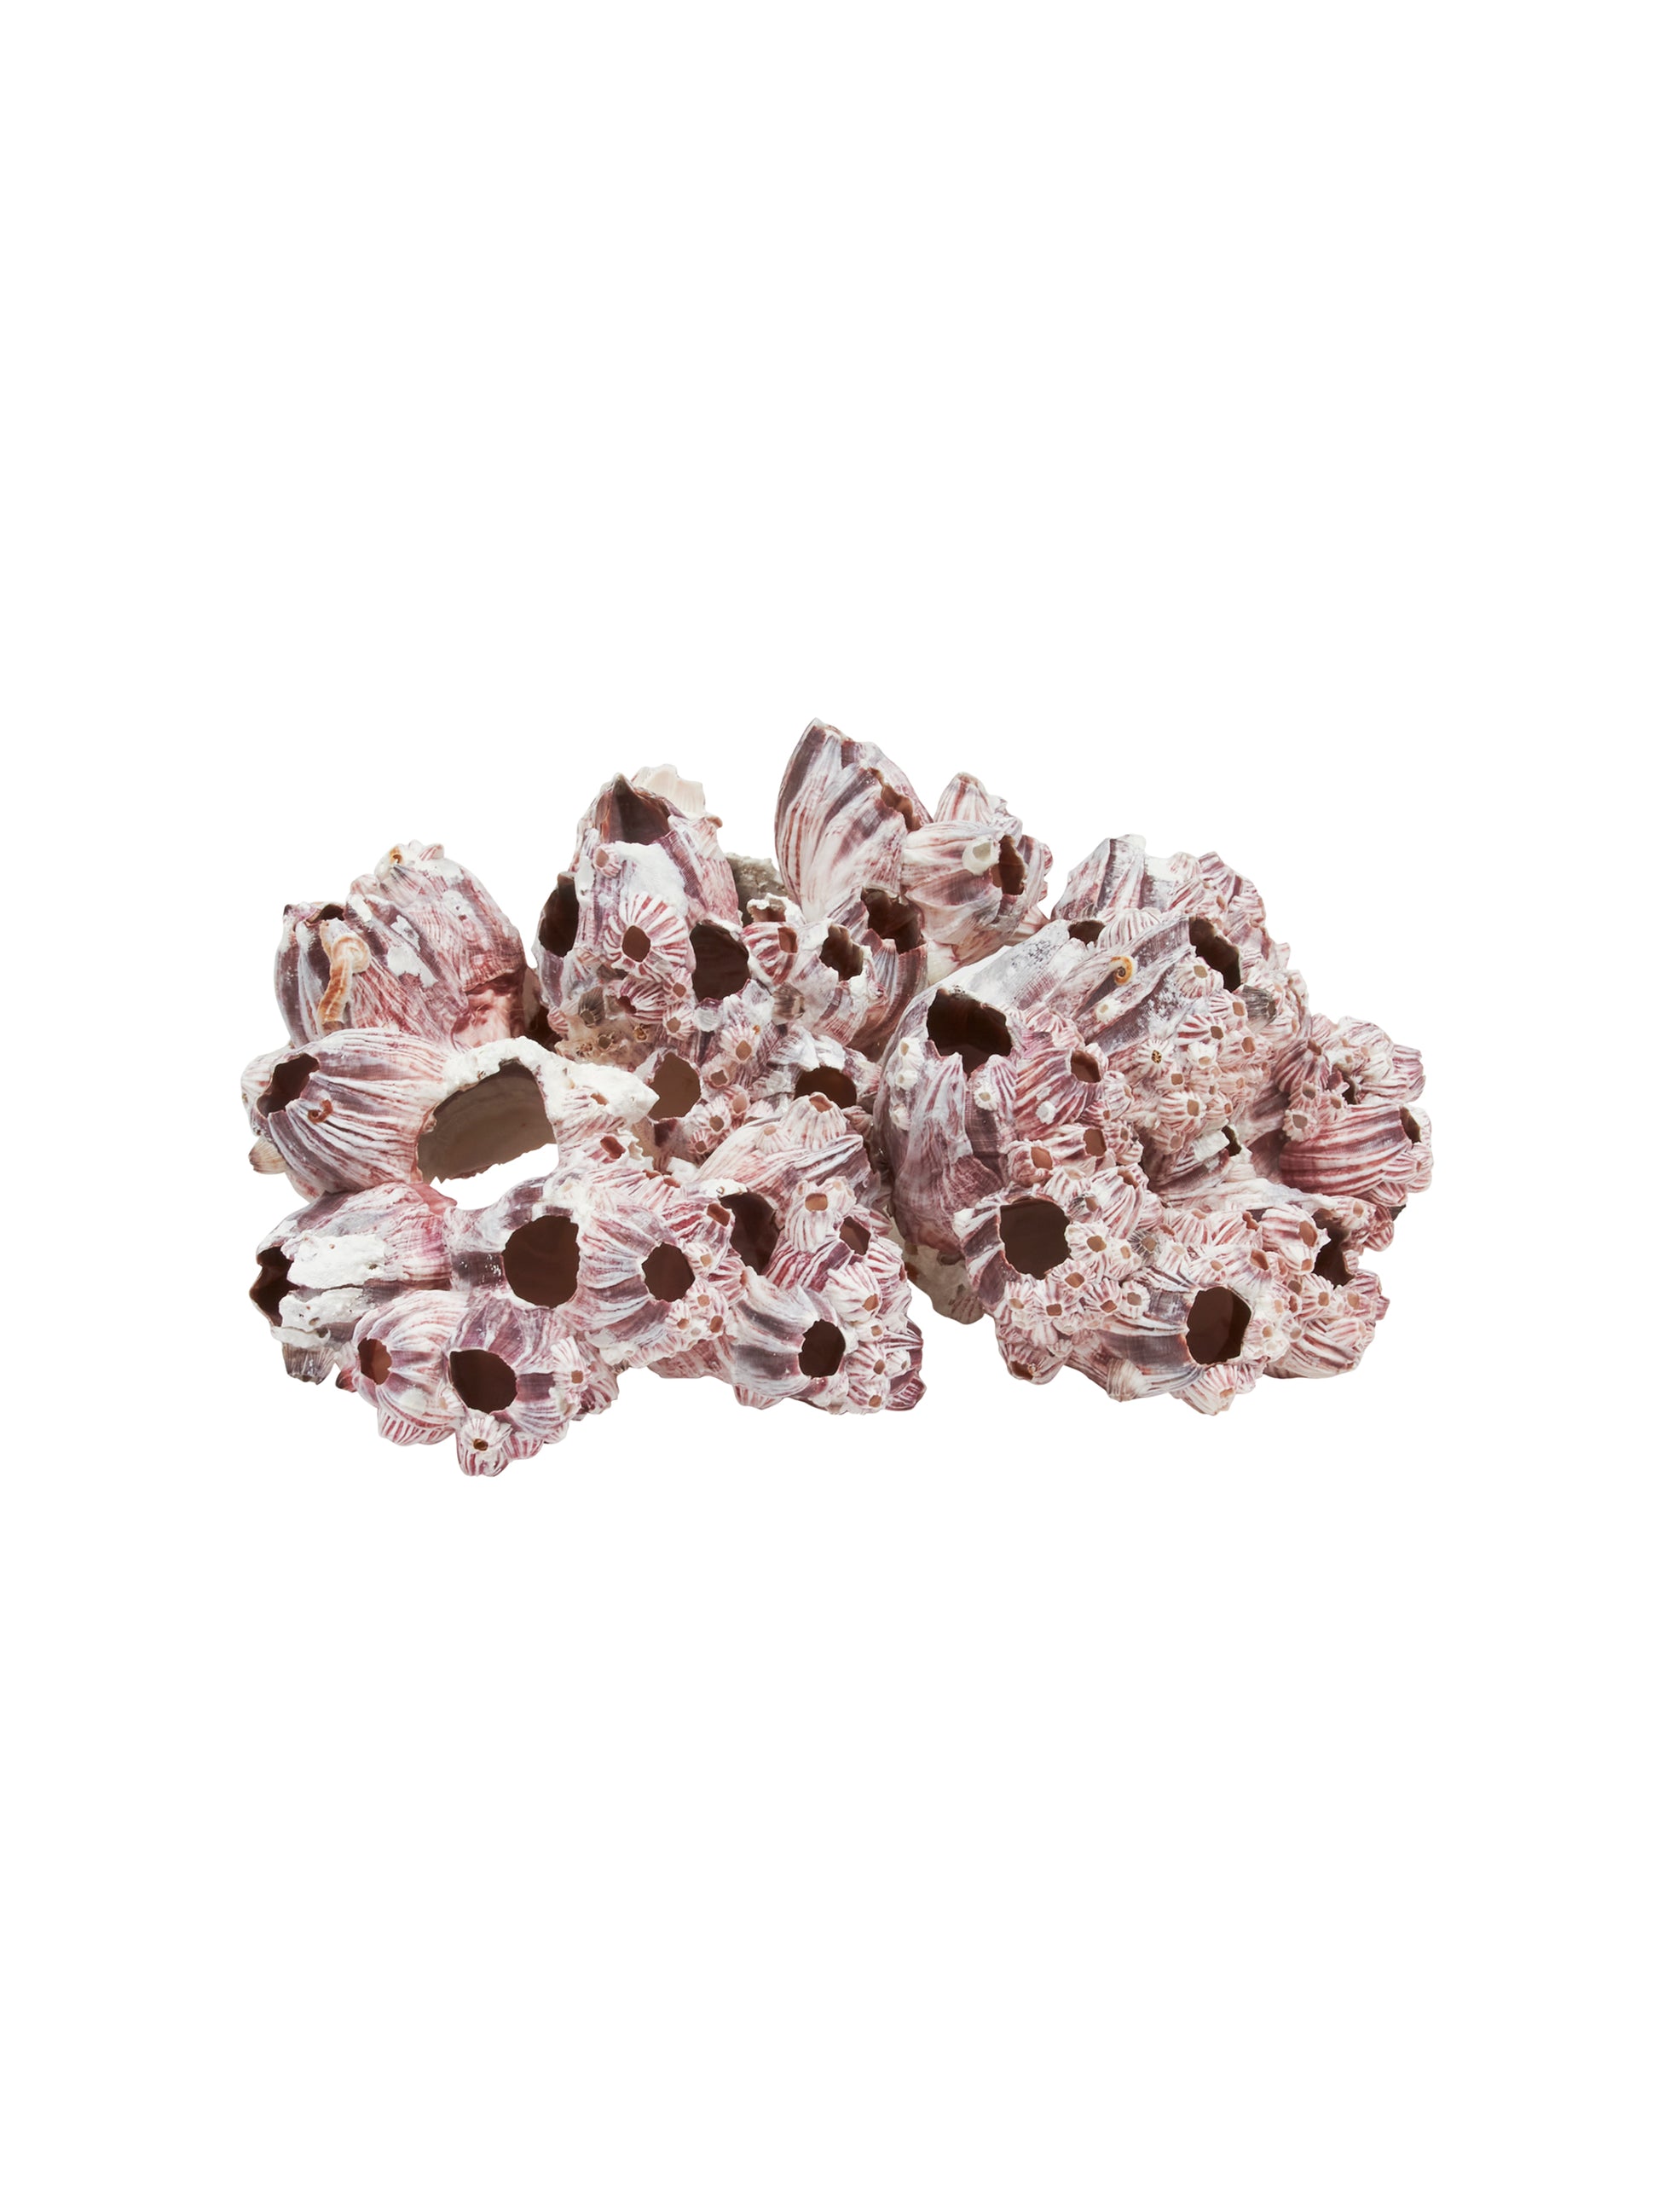 South Pacific Purple and White Barnacle Weston Table